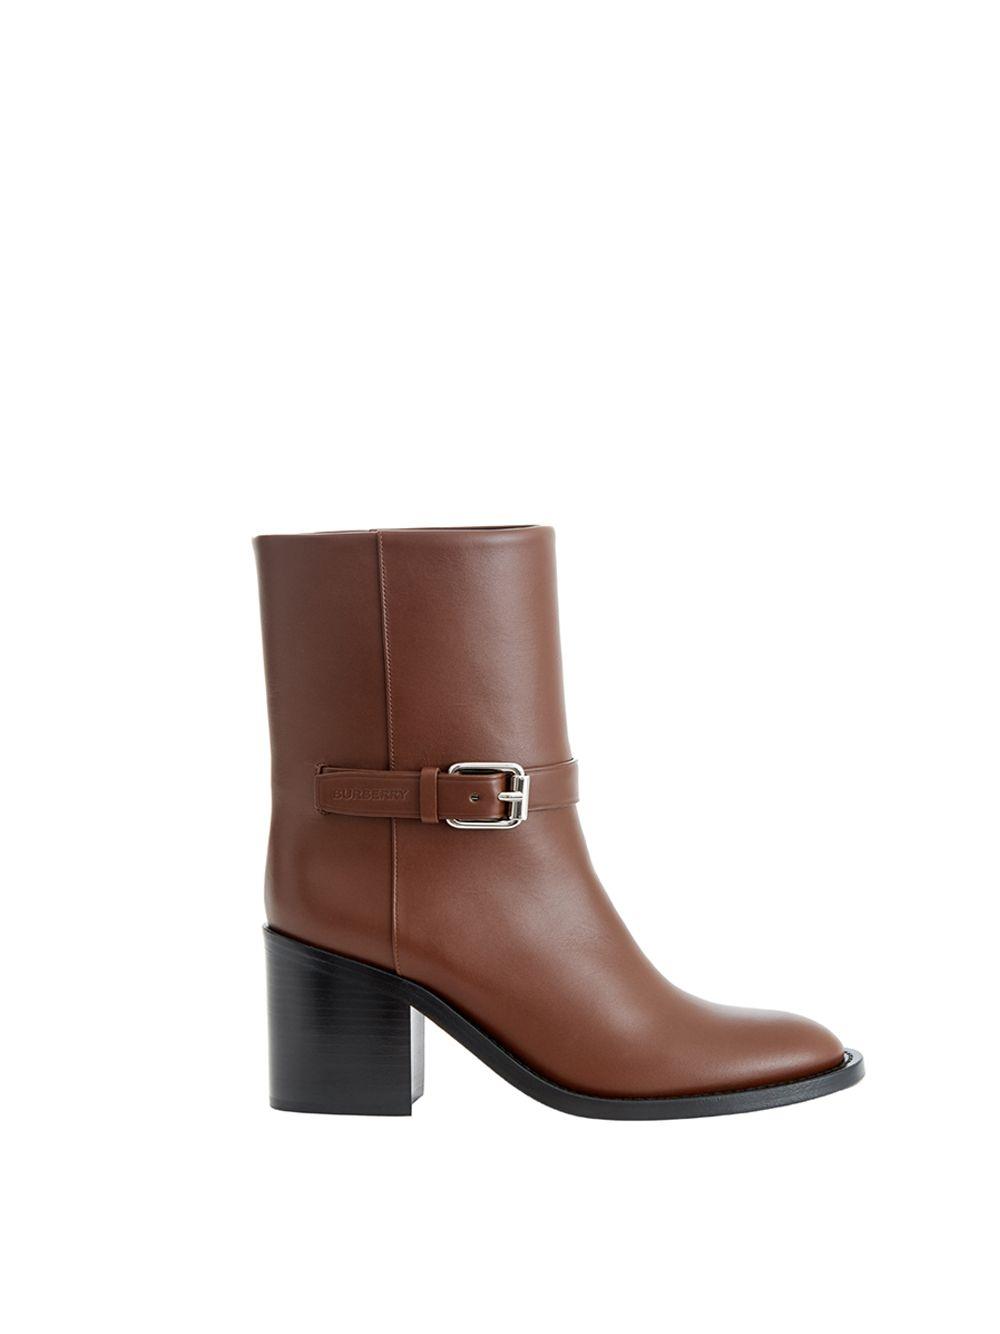 Burberry Brown Leather Ankle Boots - Ellie Belle